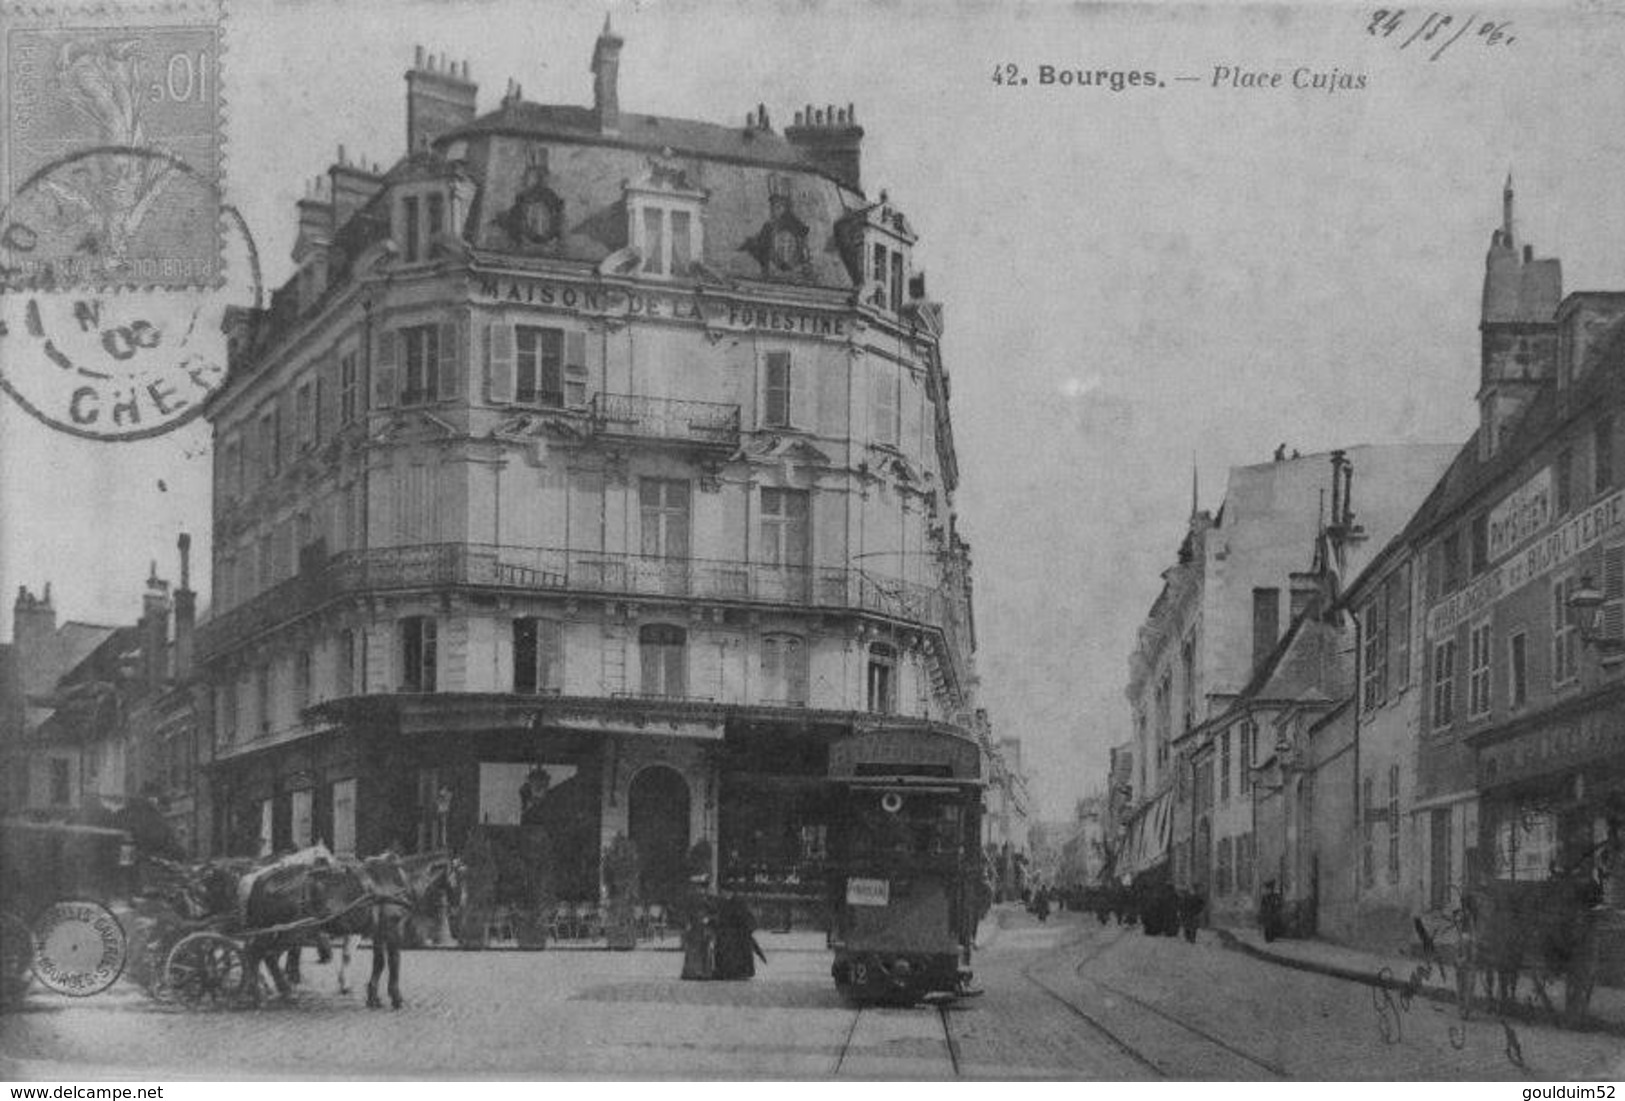 Place Cujas - Bourges